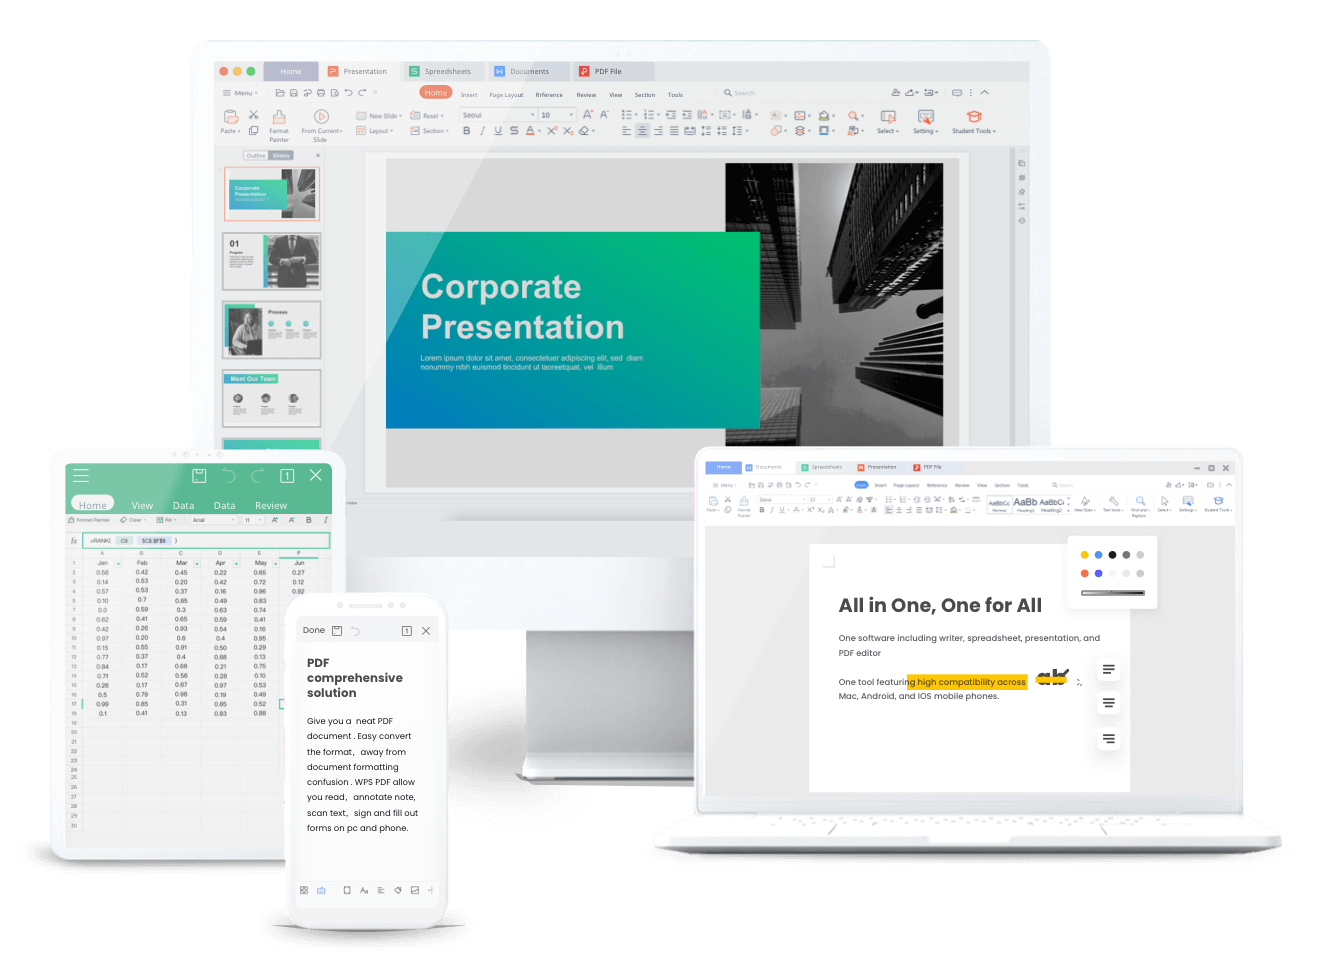 is the wps office 2019 update free